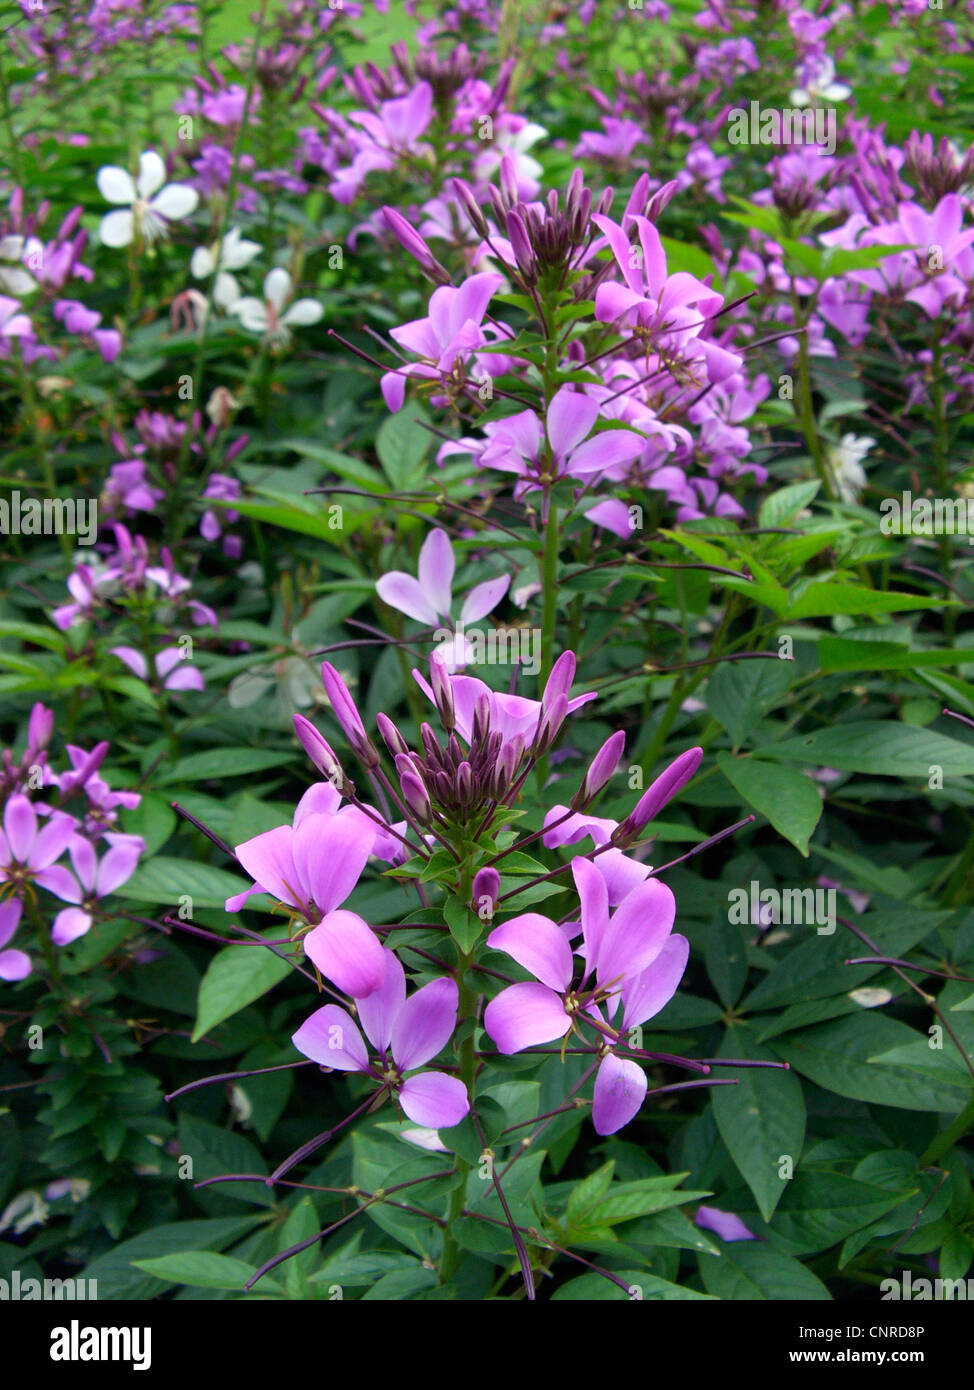 Spider flower (Cleome hassleriana, Cleome spinosa), blooming Stock Photo